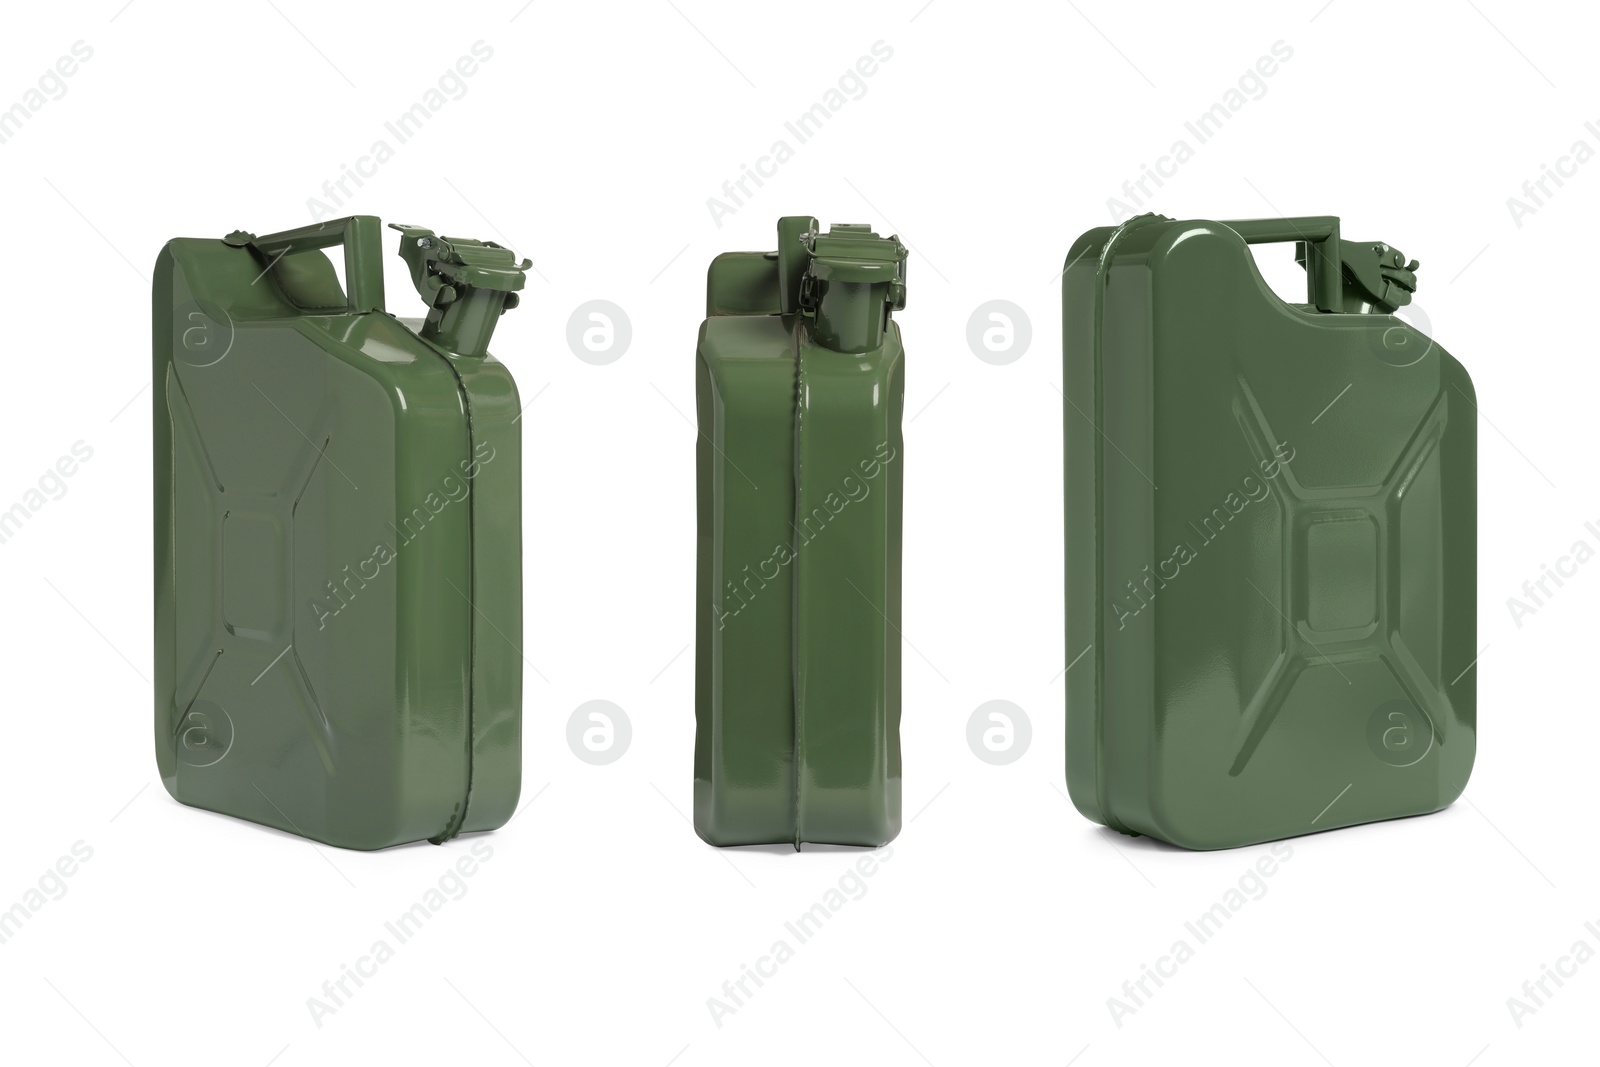 Image of Metal canister on white background, different sides